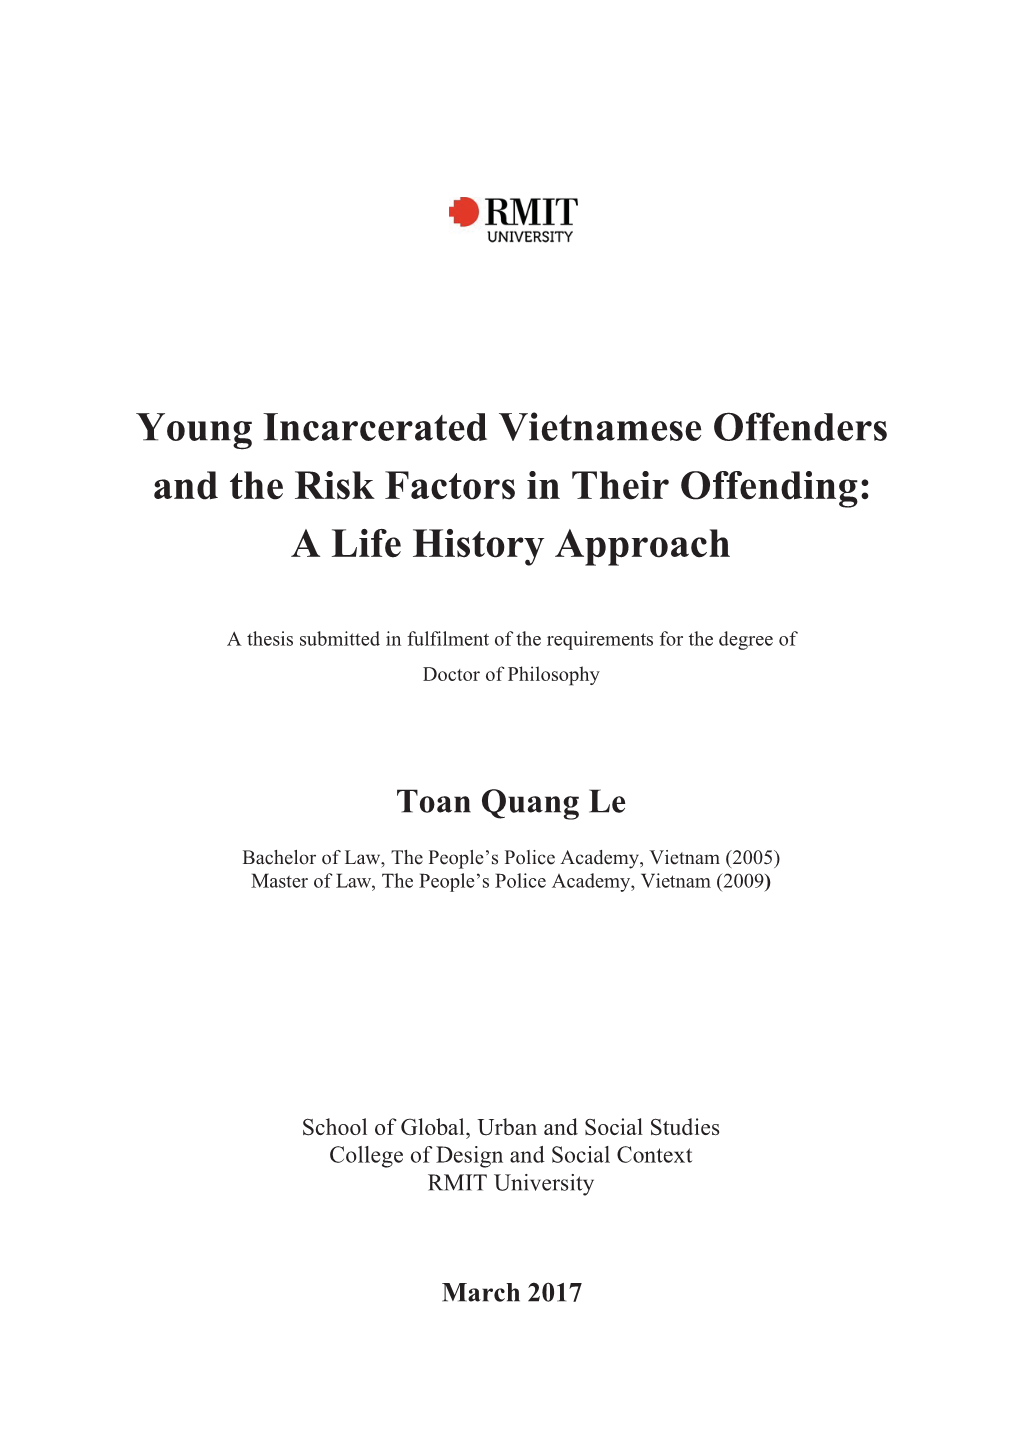 Young Incarcerated Vietnamese Offenders and the Risk Factors in Their Offending: a Life History Approach